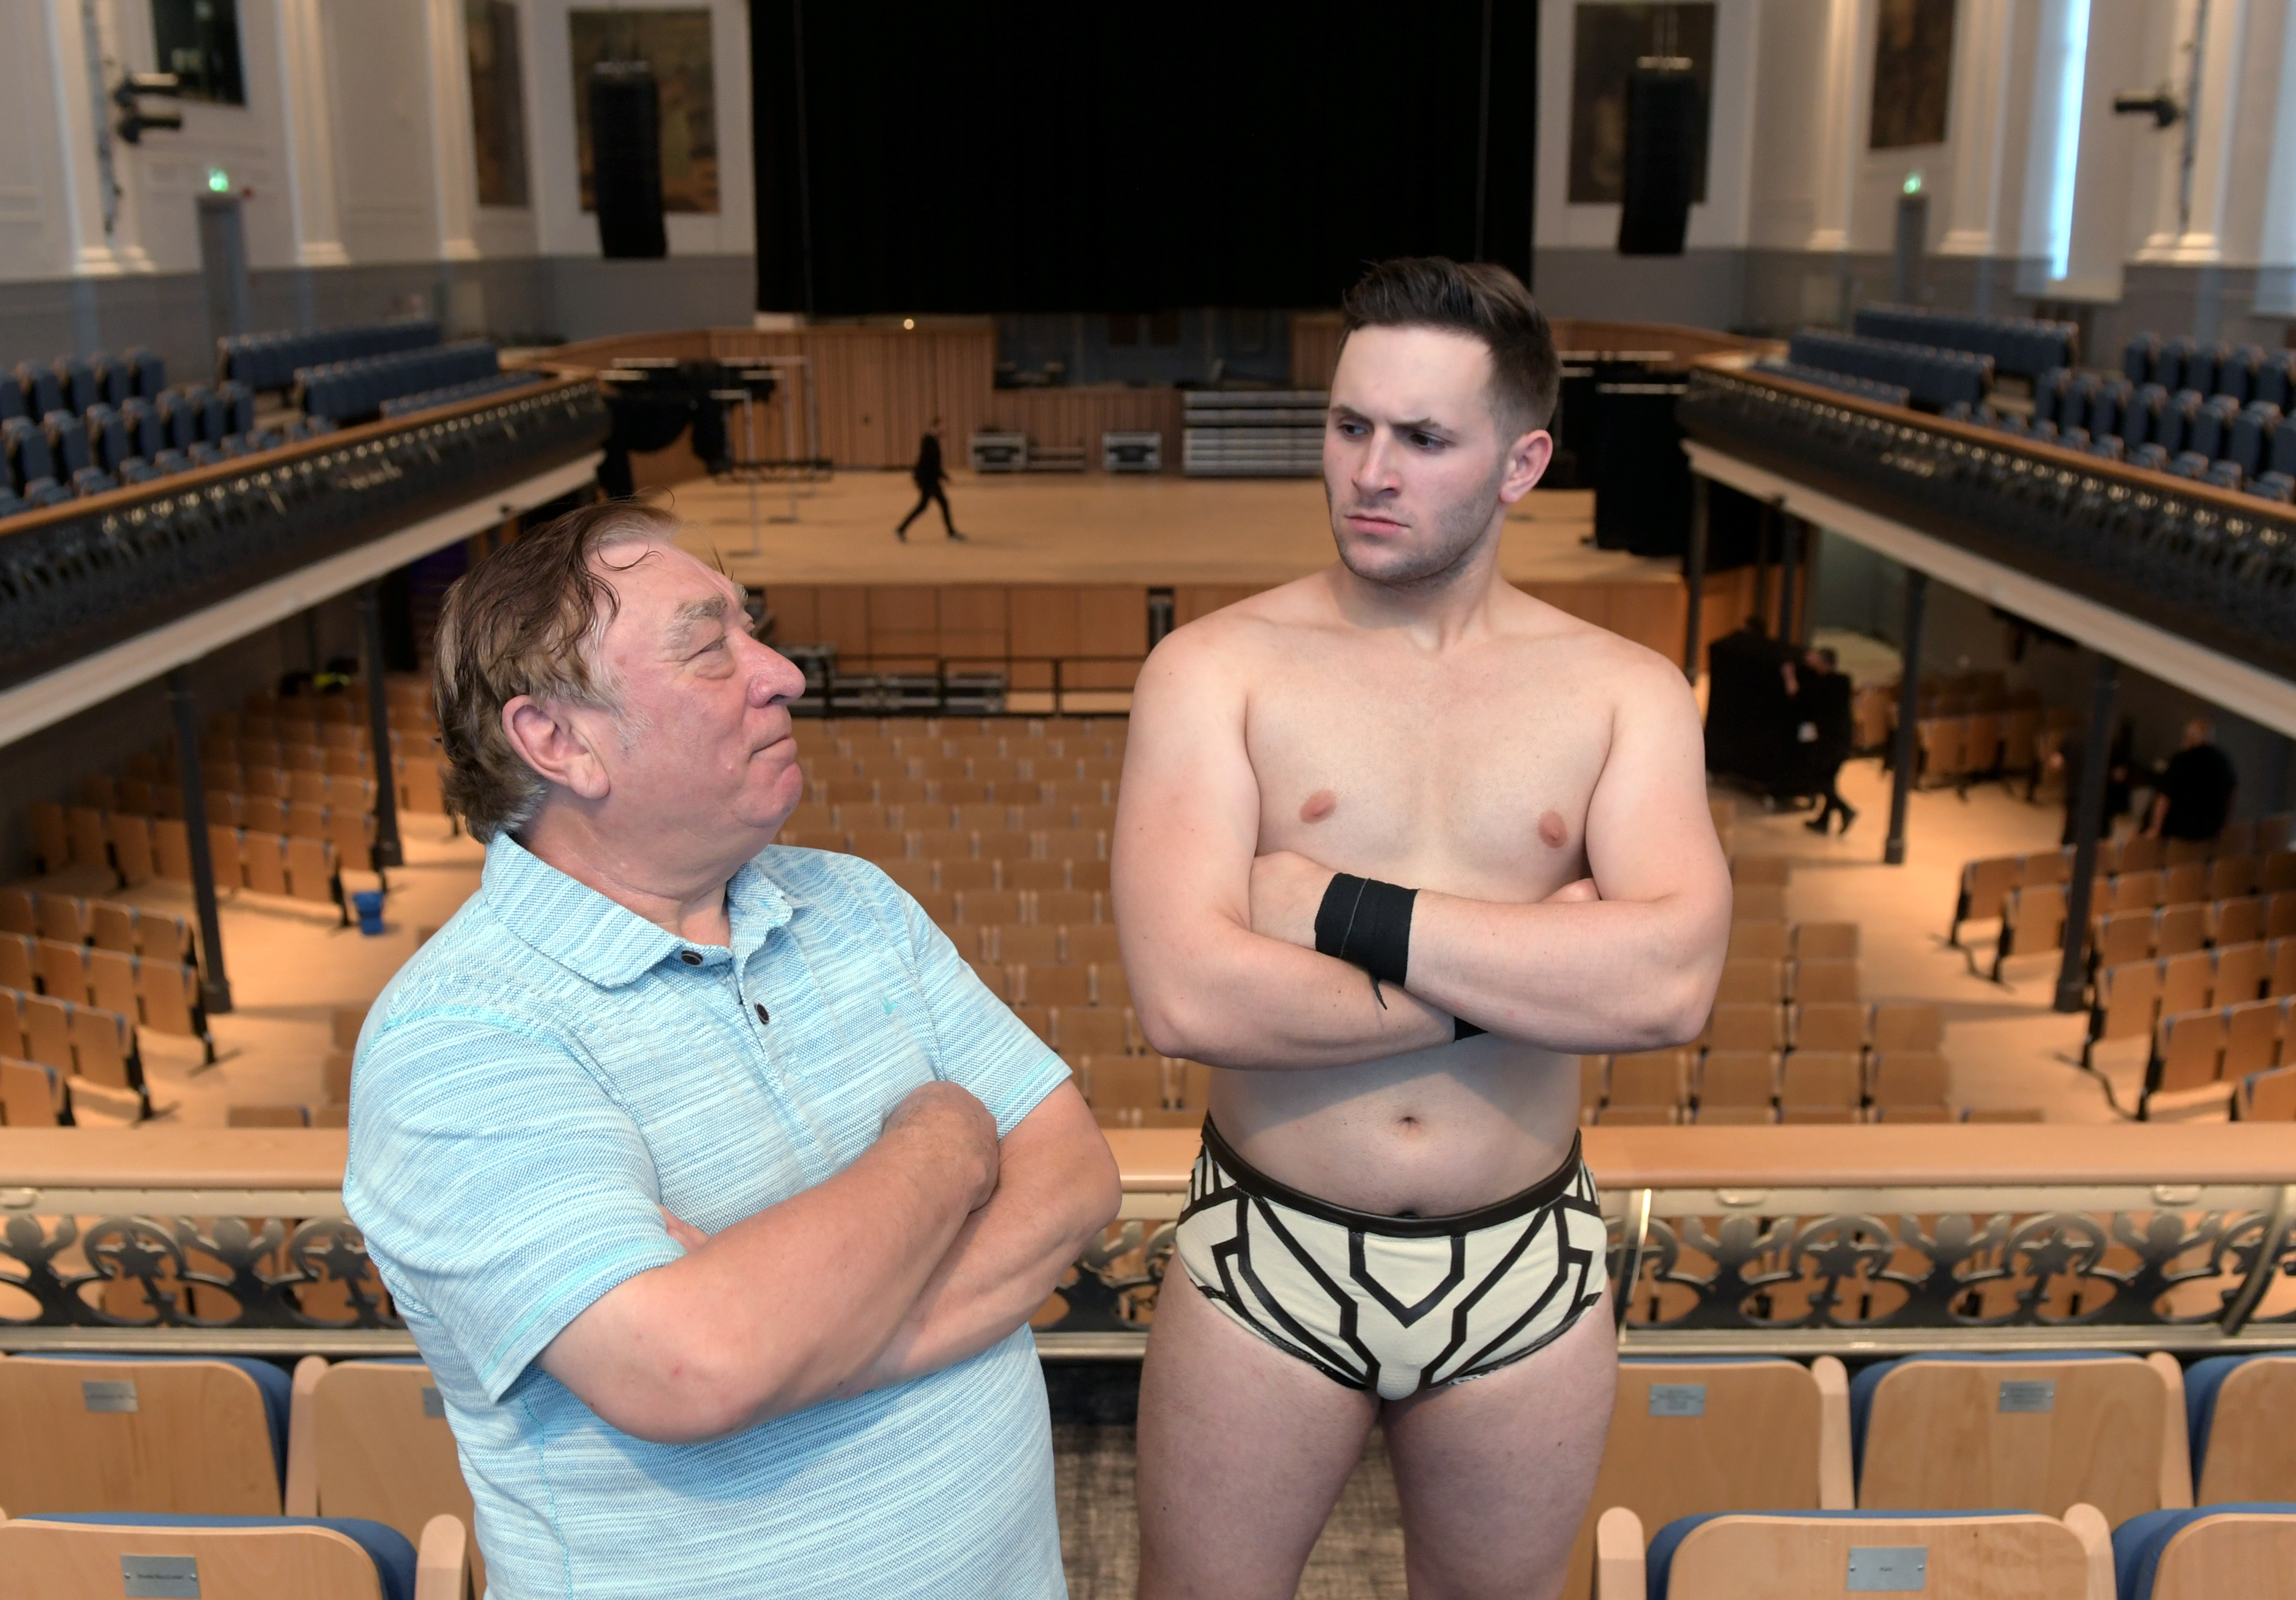 Aberdeen Music Hall. Former wrestler Len Ironside with his protégé Samuel Wilson aka Leo King, who has been training in America at a WWE academy. CR0009451
17/05/19
Picture by KATH FLANNERY